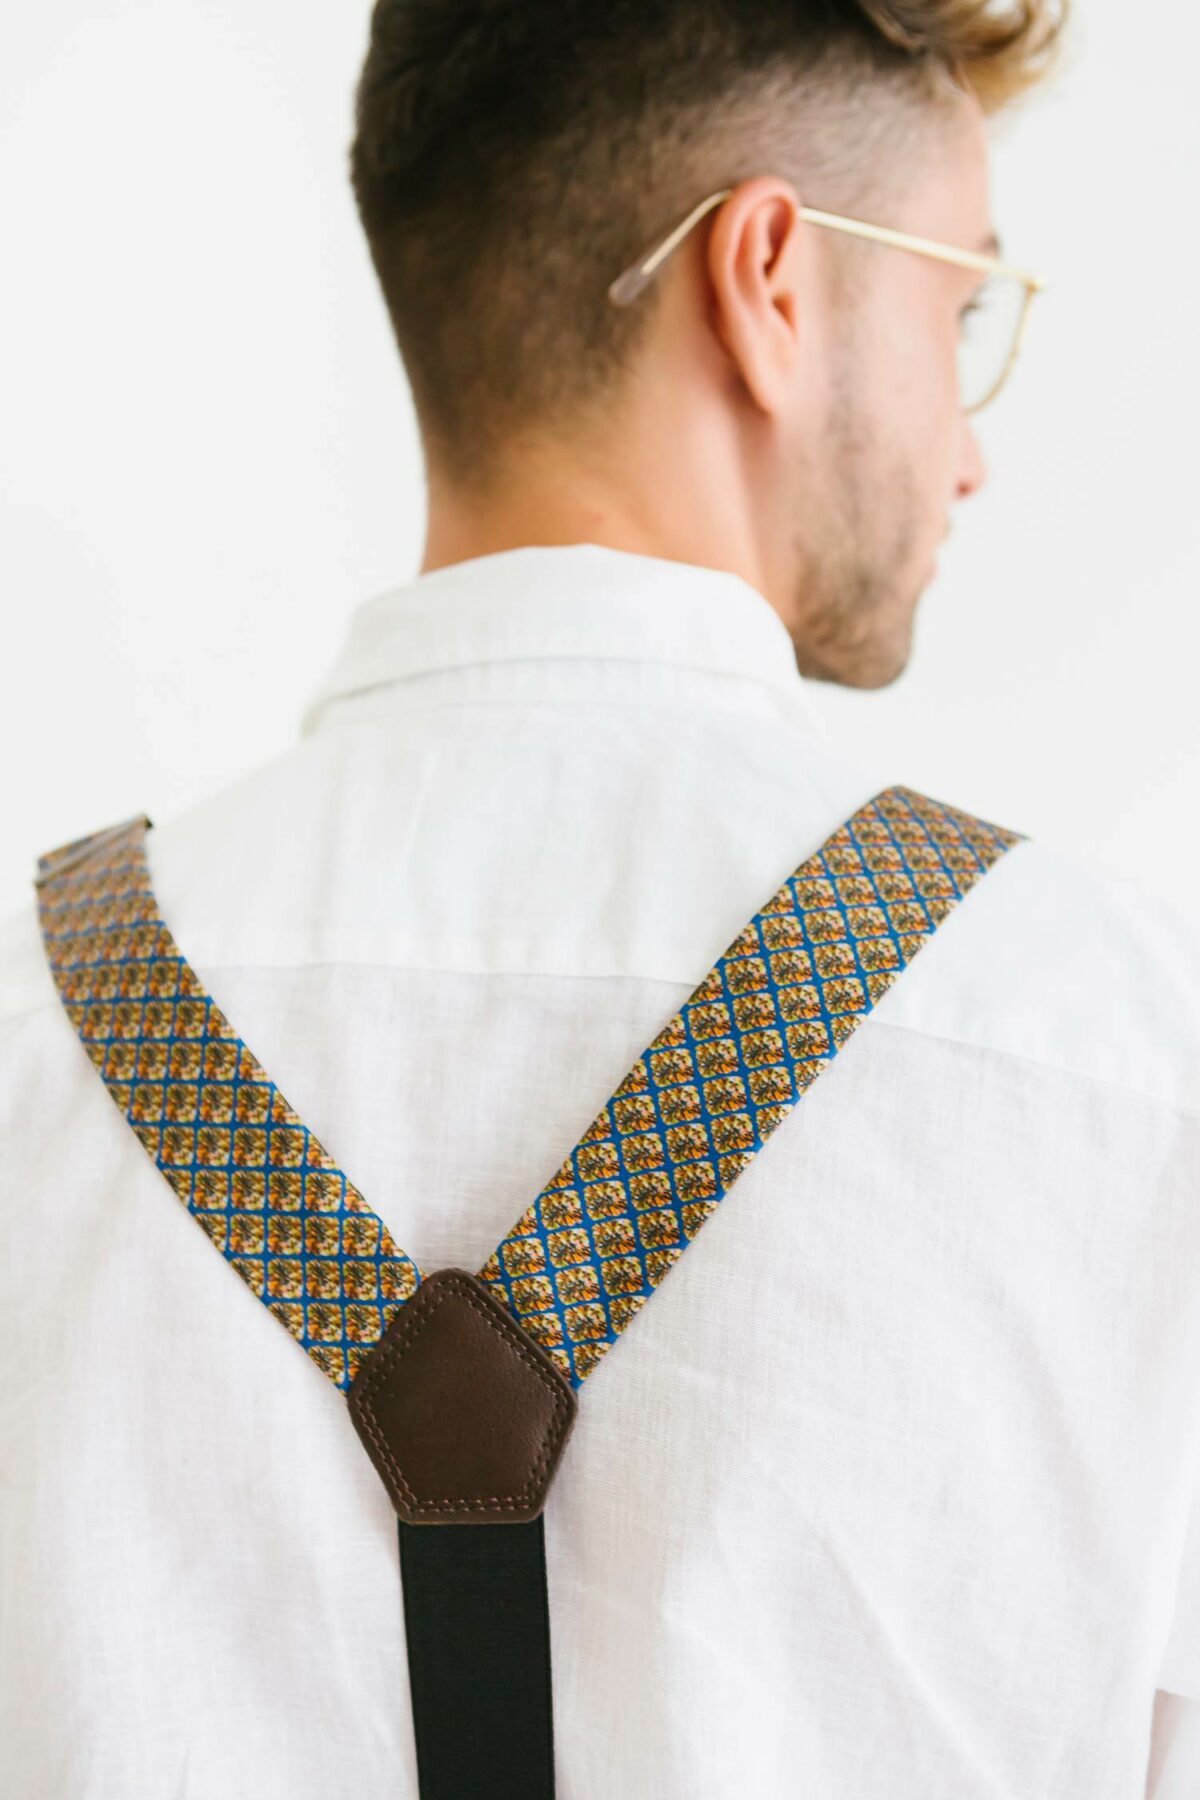 man with brown suspenders